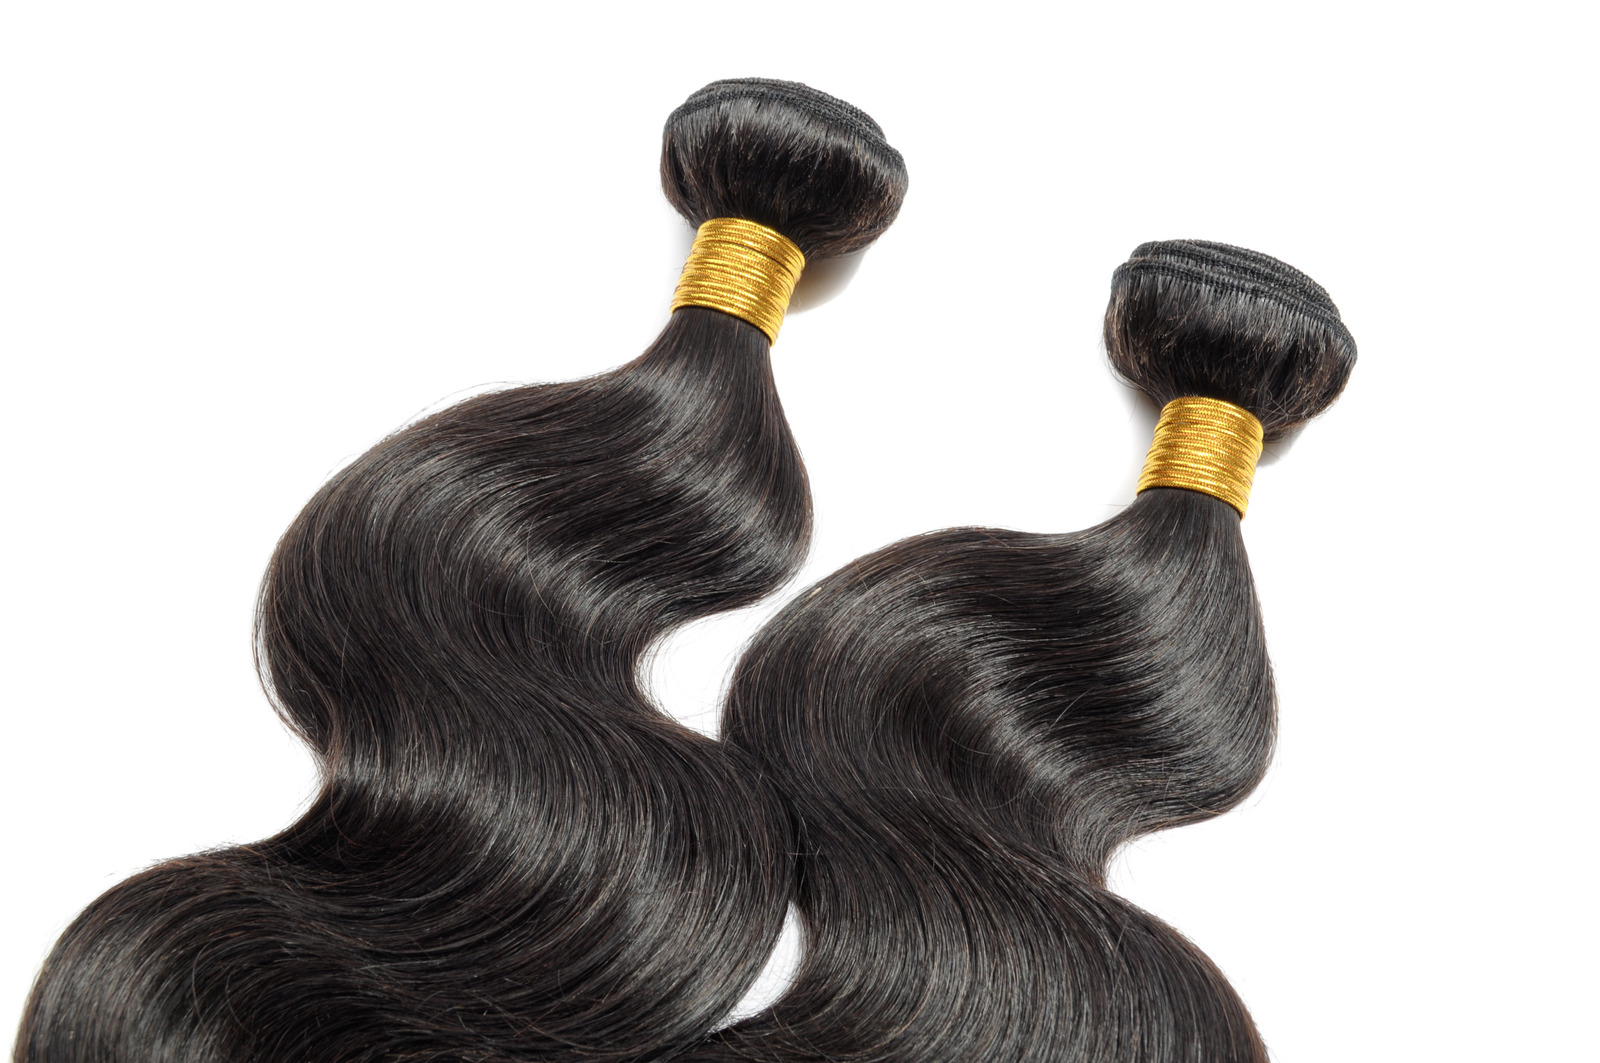 Black Hair Care Industry Takes a Hit Due to Coronavirus Outbreak